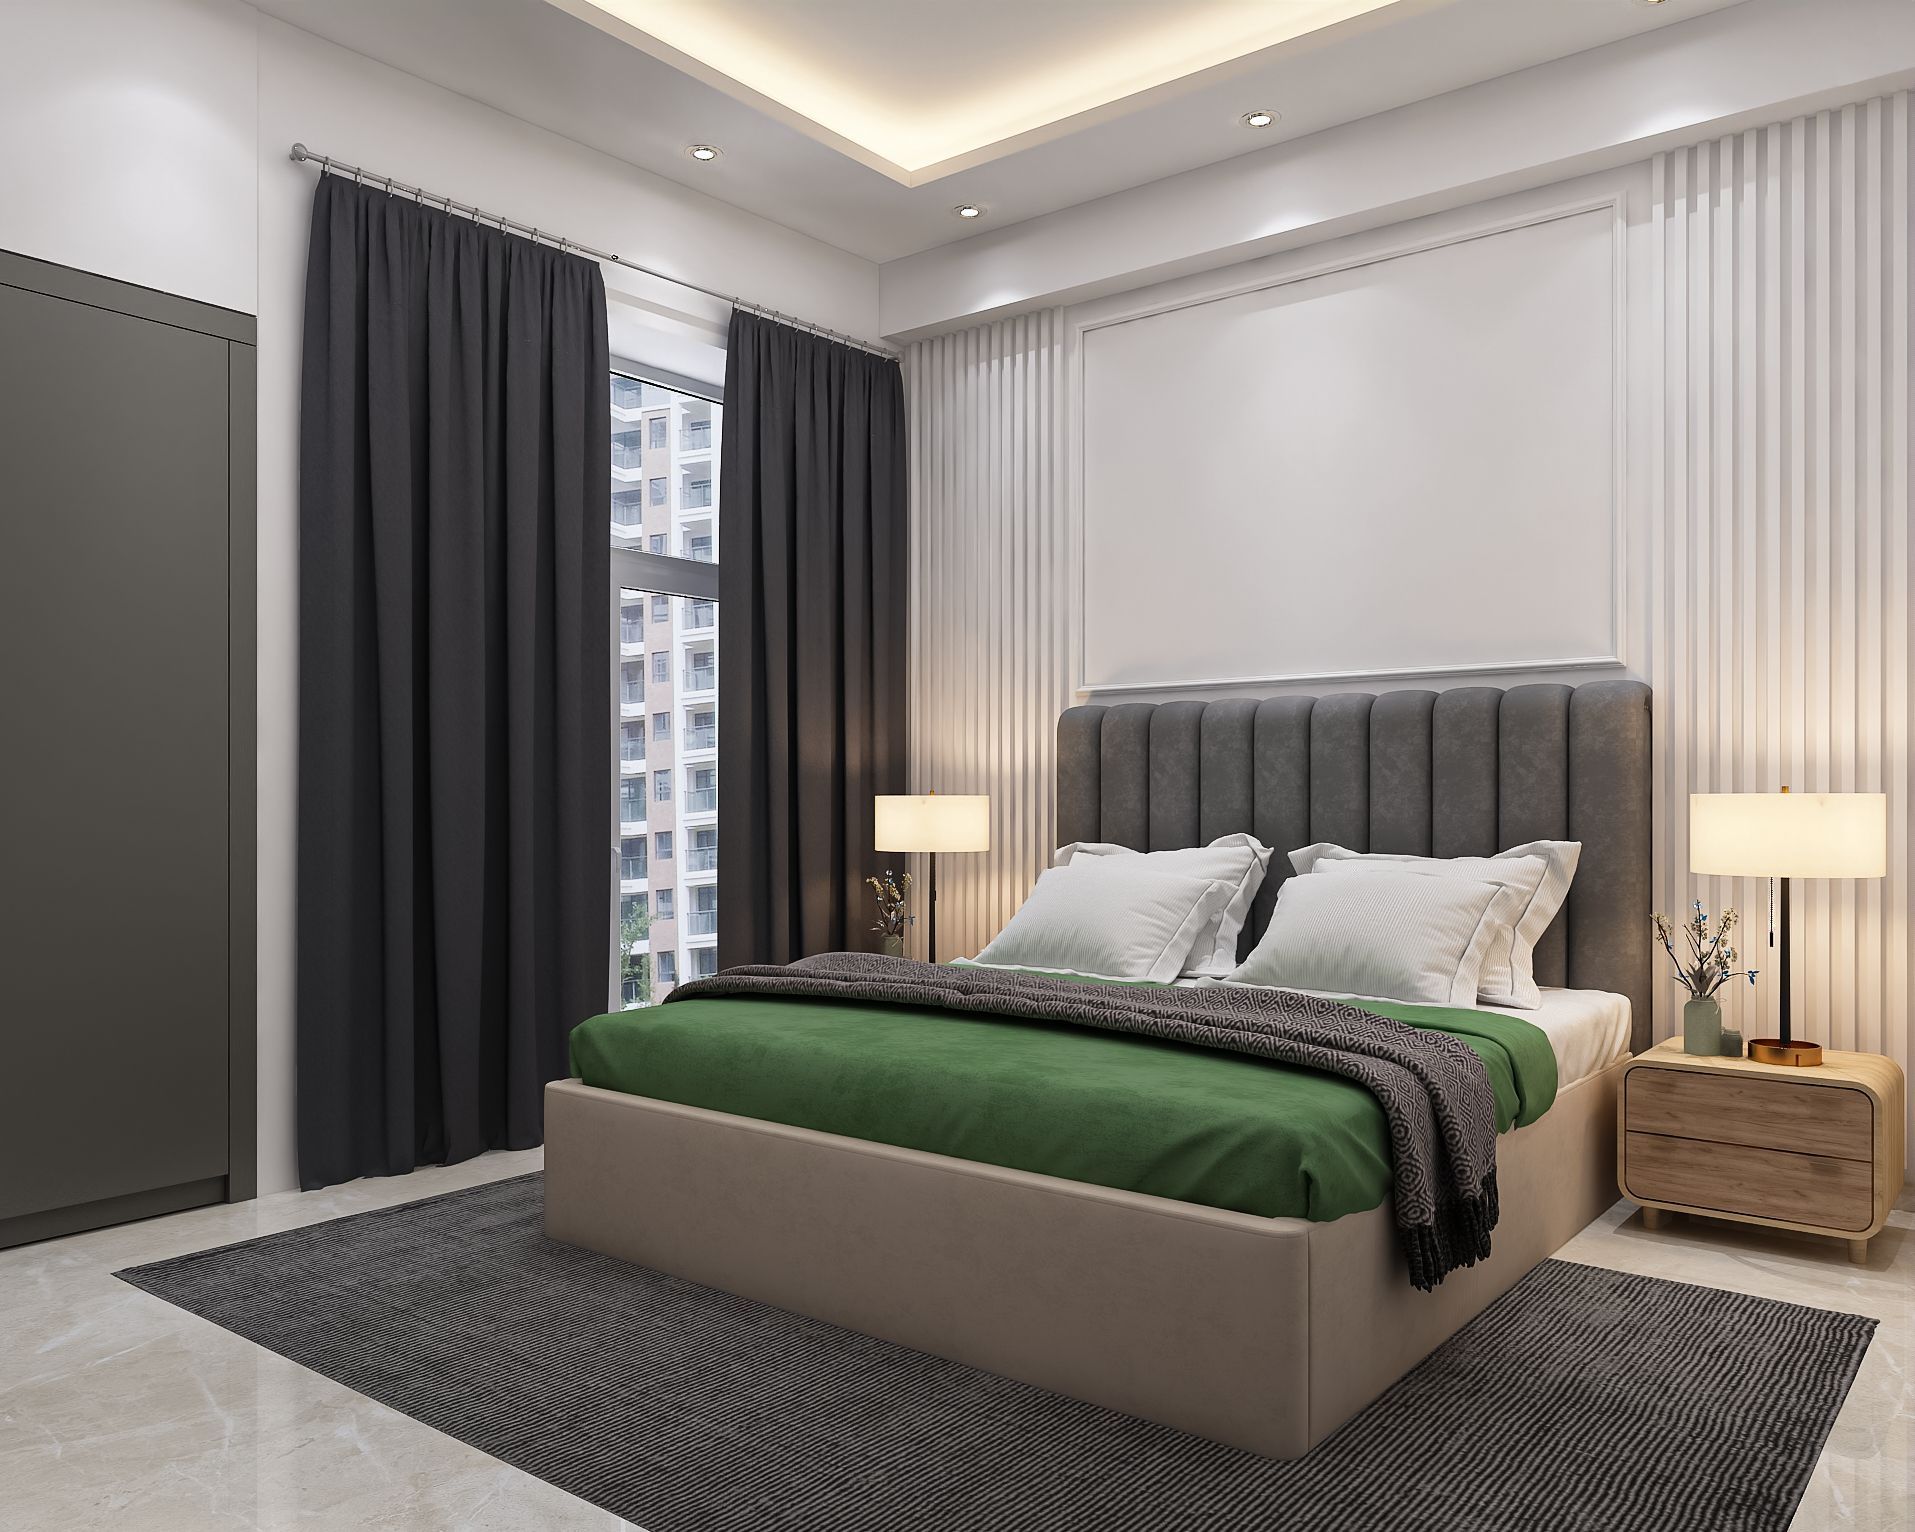 Modern Bedroom Design With Wall Trims And Panels